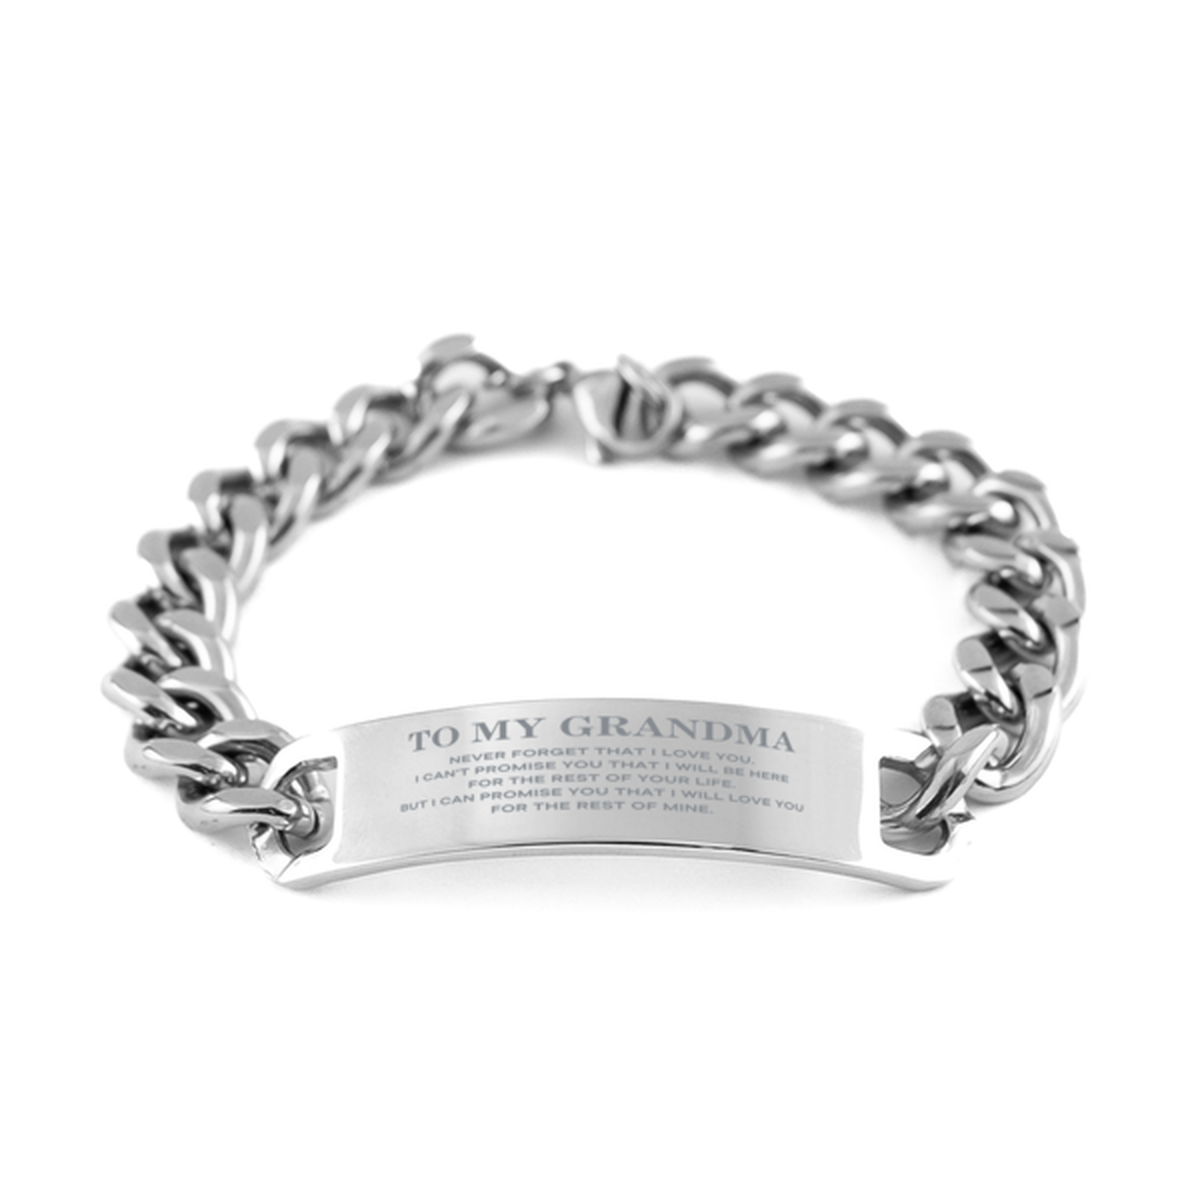 To My Grandma Gifts, I will love you for the rest of mine, Love Grandma Bracelet, Birthday Christmas Unique Cuban Chain Stainless Steel Bracelet For Grandma